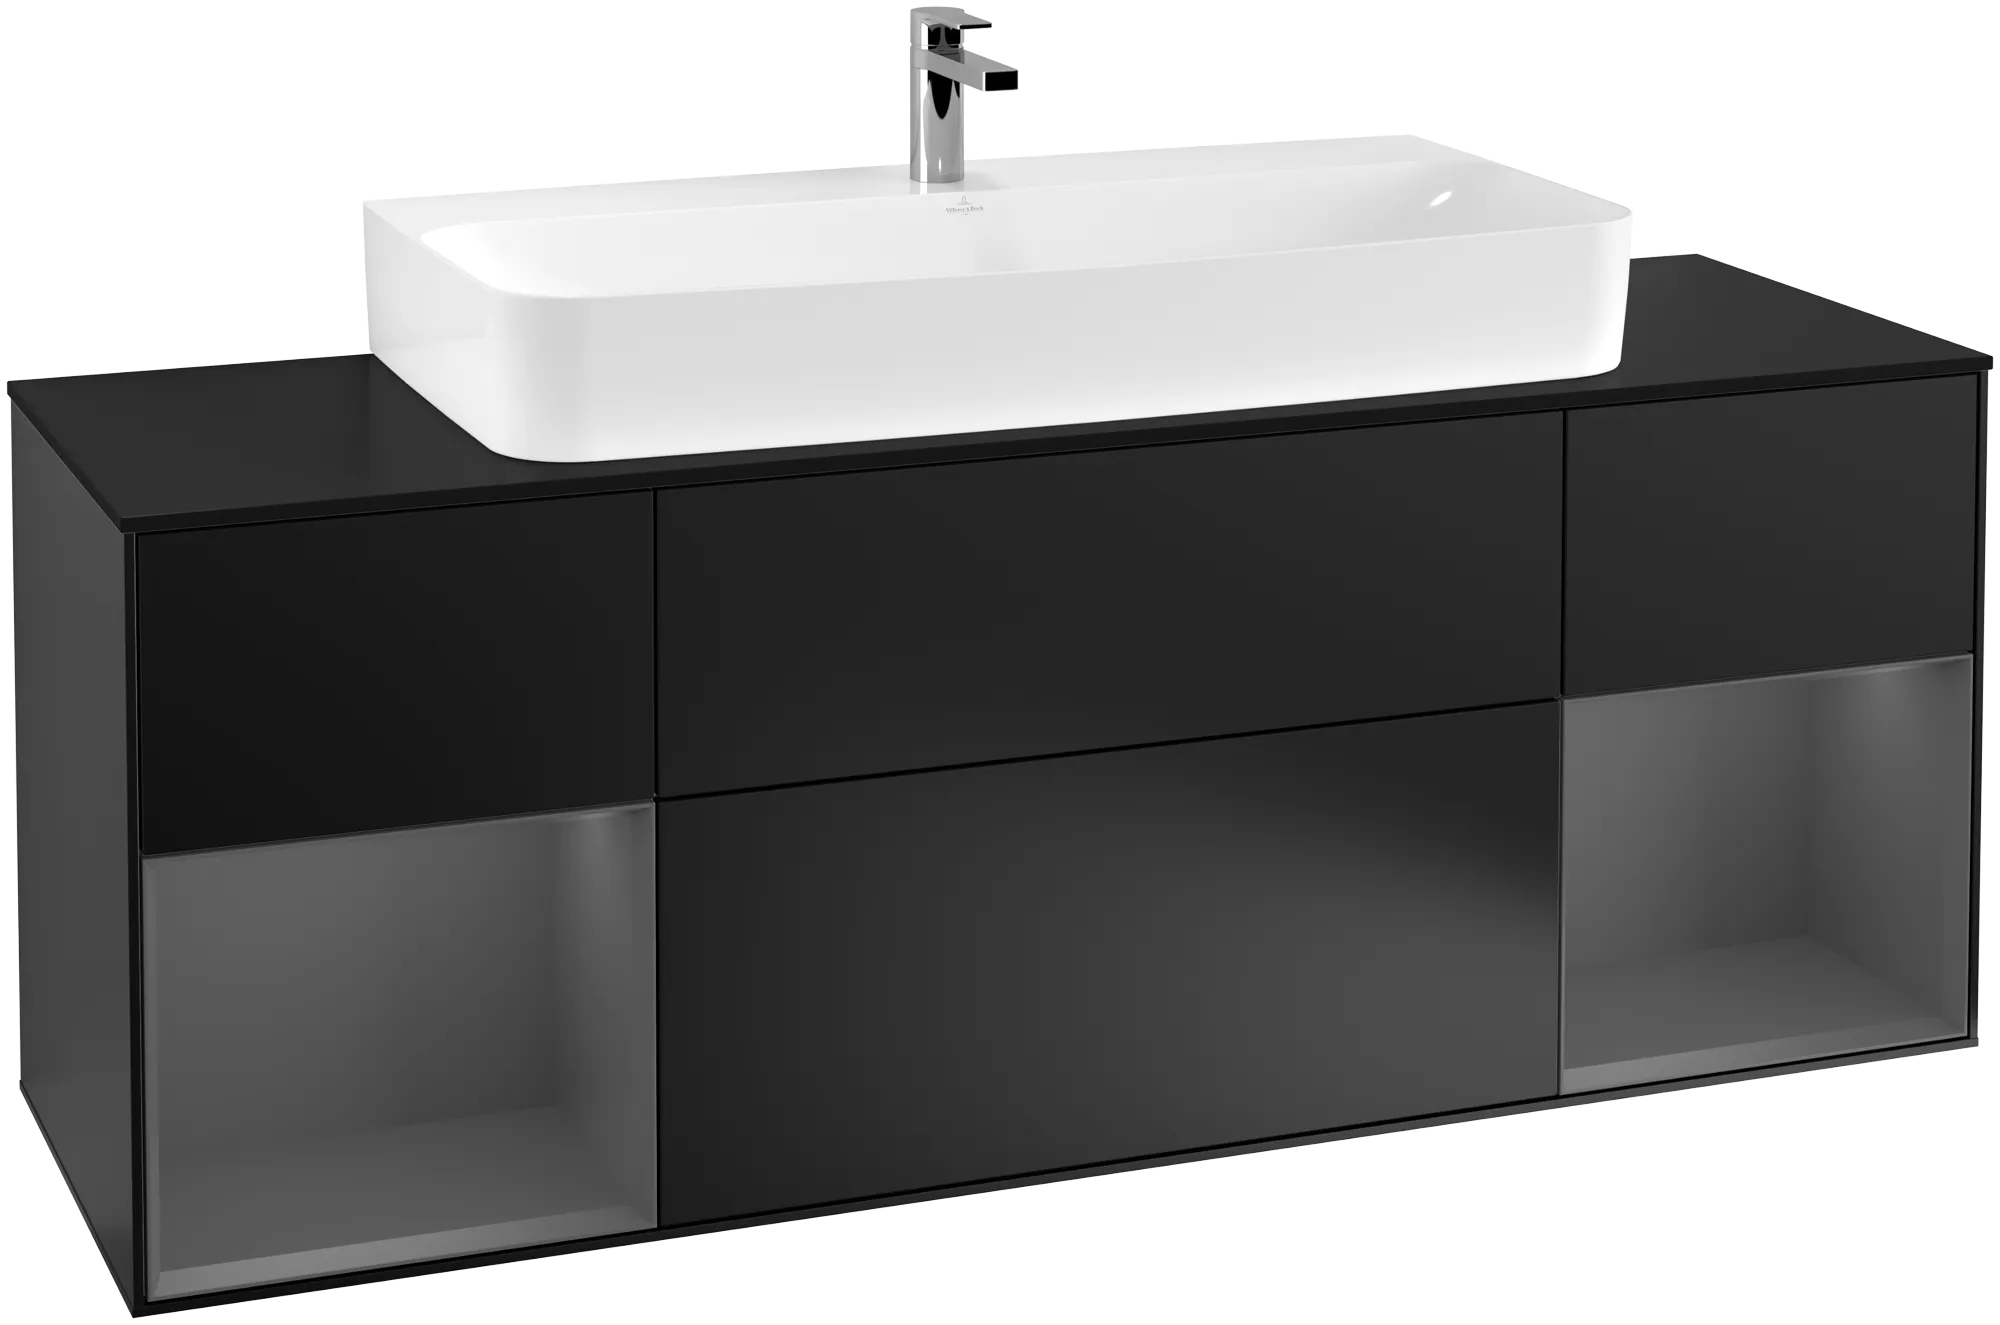 Picture of VILLEROY BOCH Finion Vanity unit, with lighting, 4 pull-out compartments, 1600 x 603 x 501 mm, Black Matt Lacquer / Anthracite Matt Lacquer / Glass Black Matt #G212GKPD